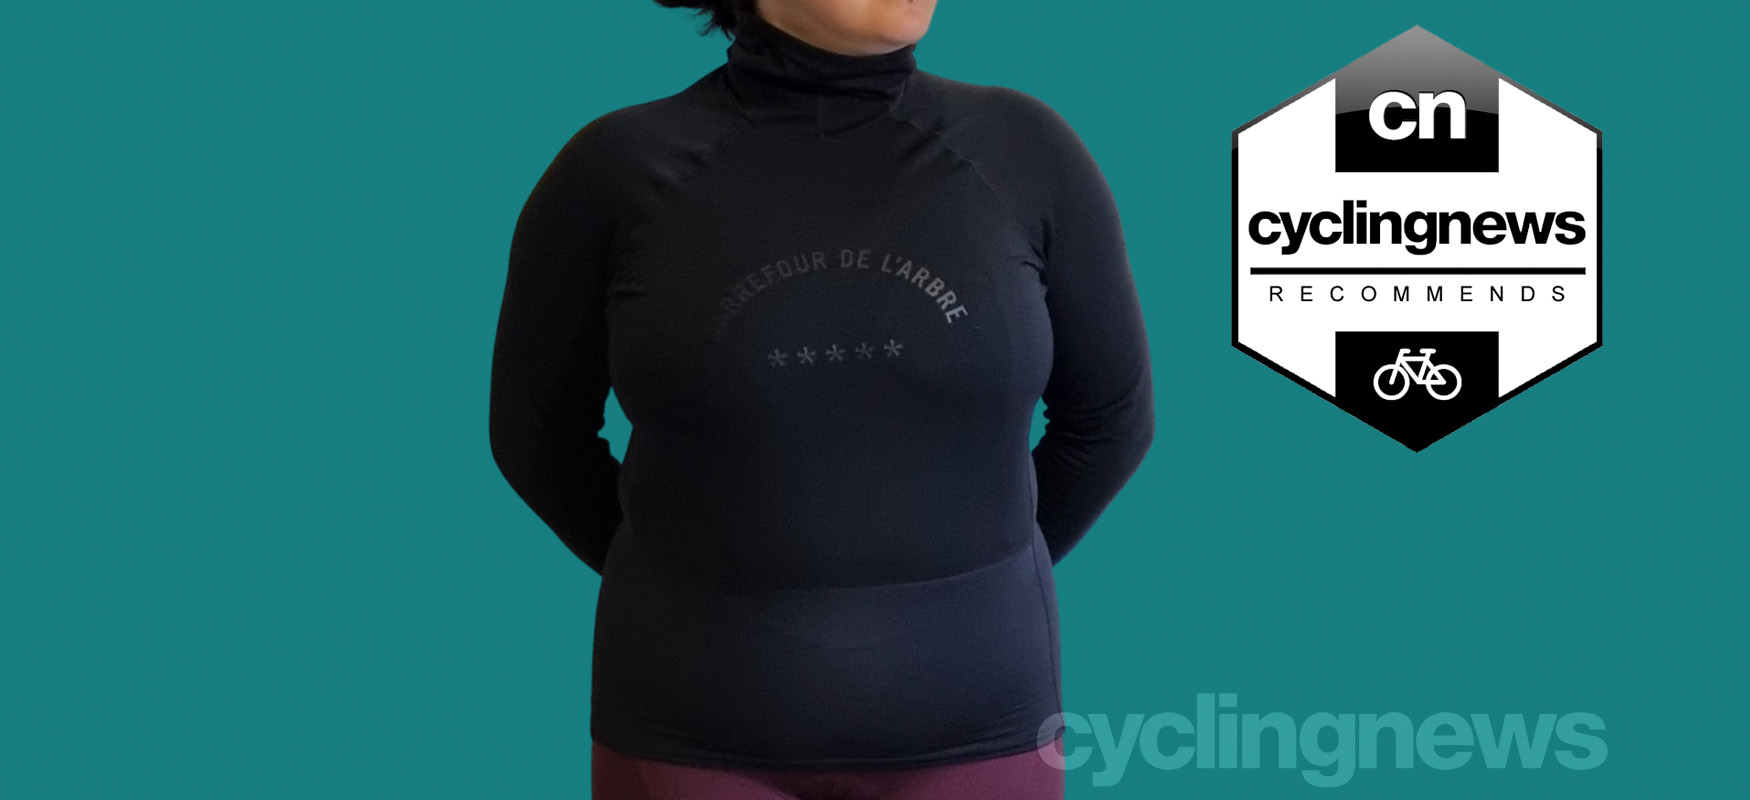 Rapha Men's Pro Team Thermal Base Layer – Long Sleeve review